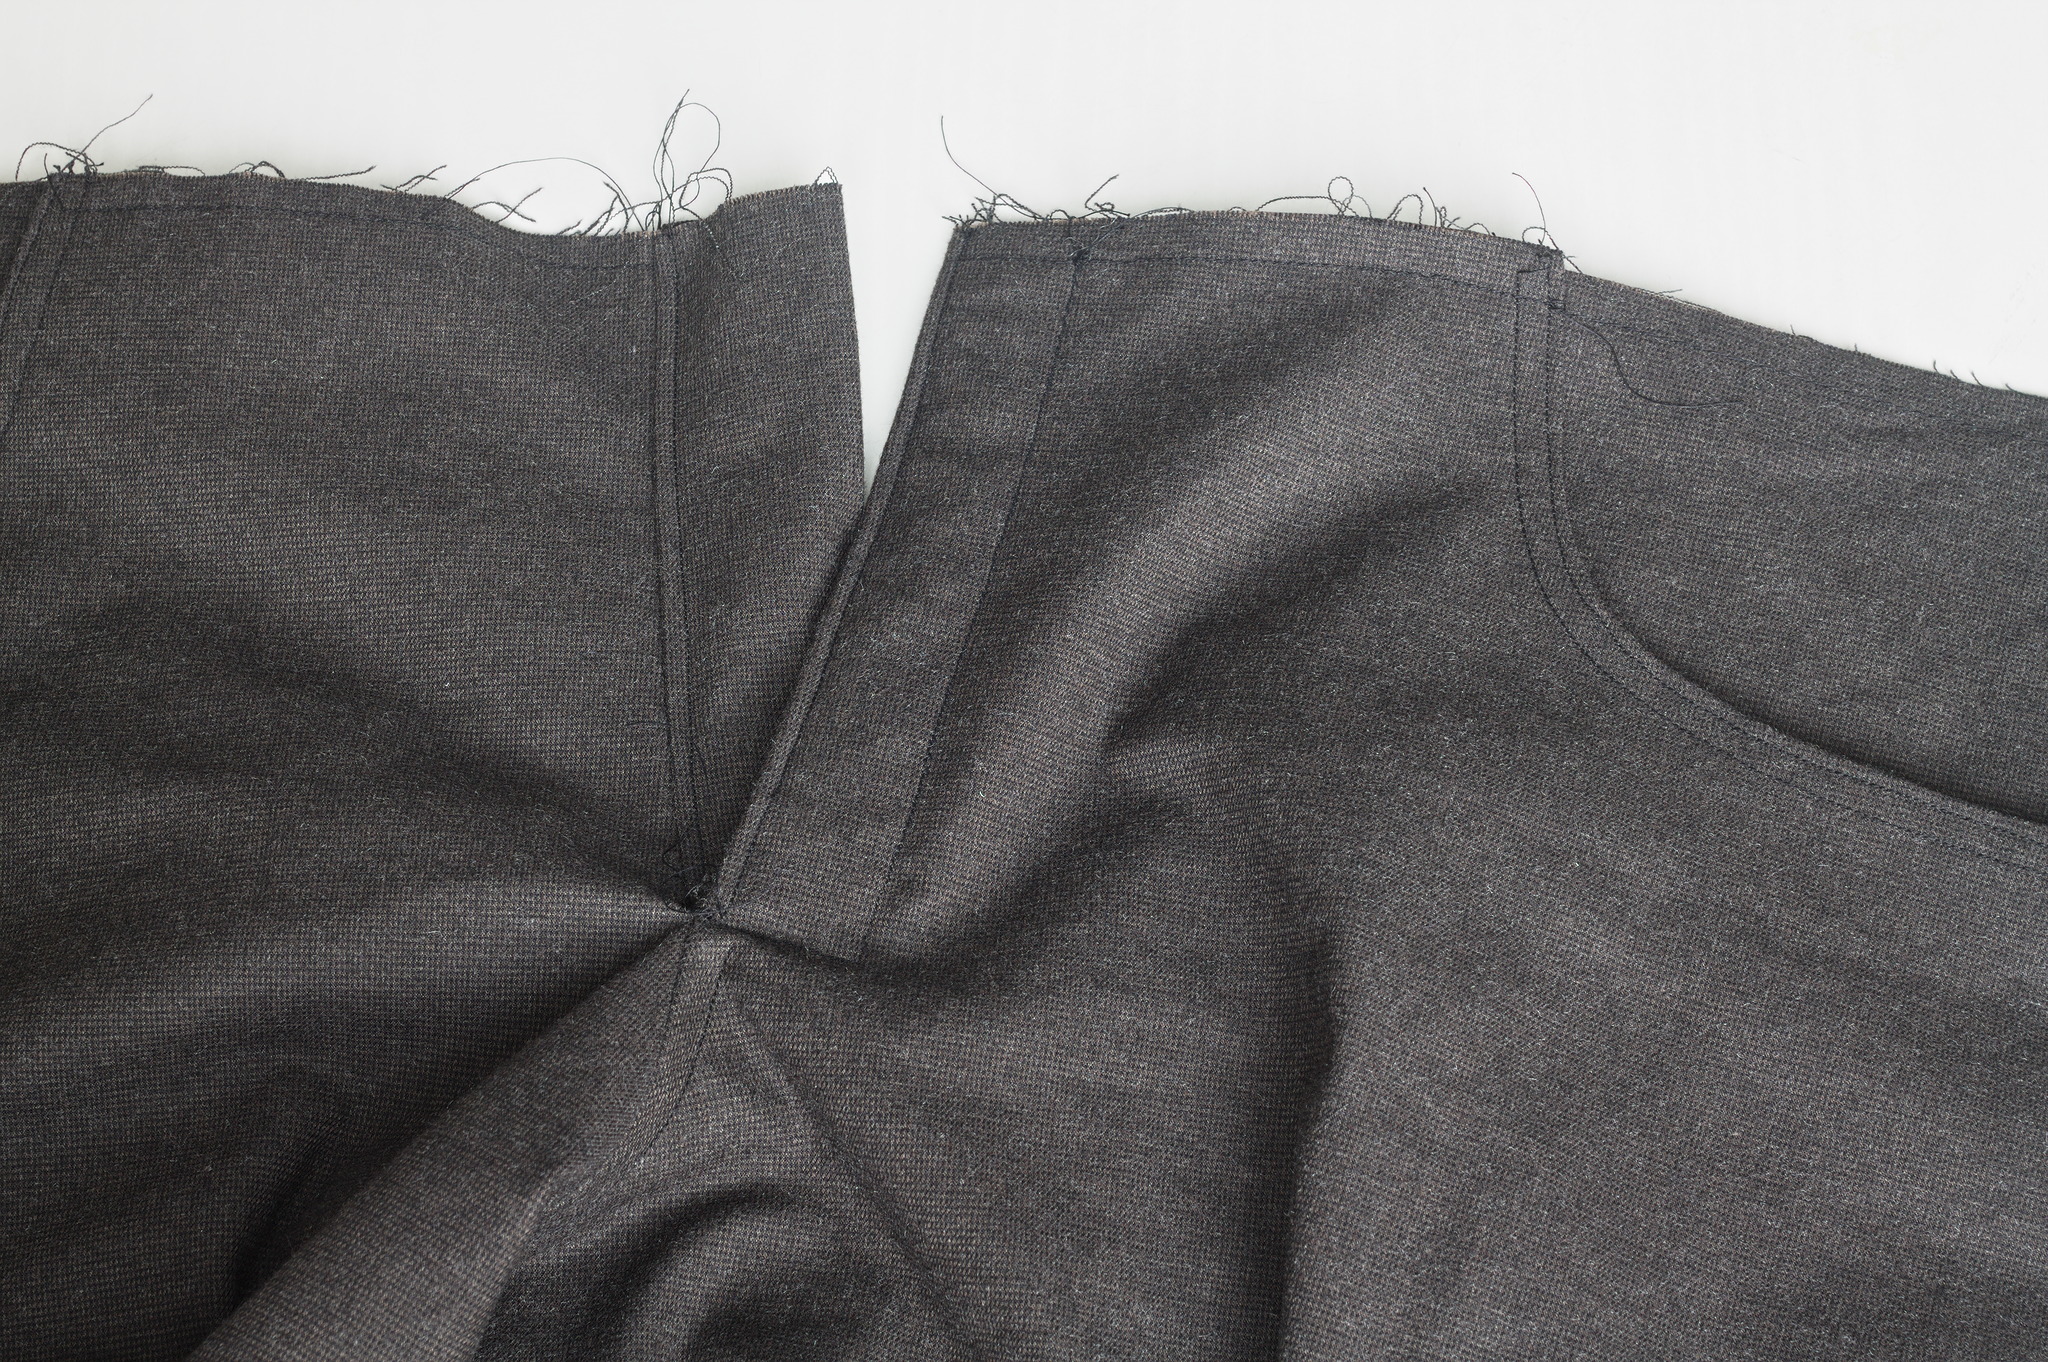 ../../../_images/0207-placket_facing_topstitched.jpg